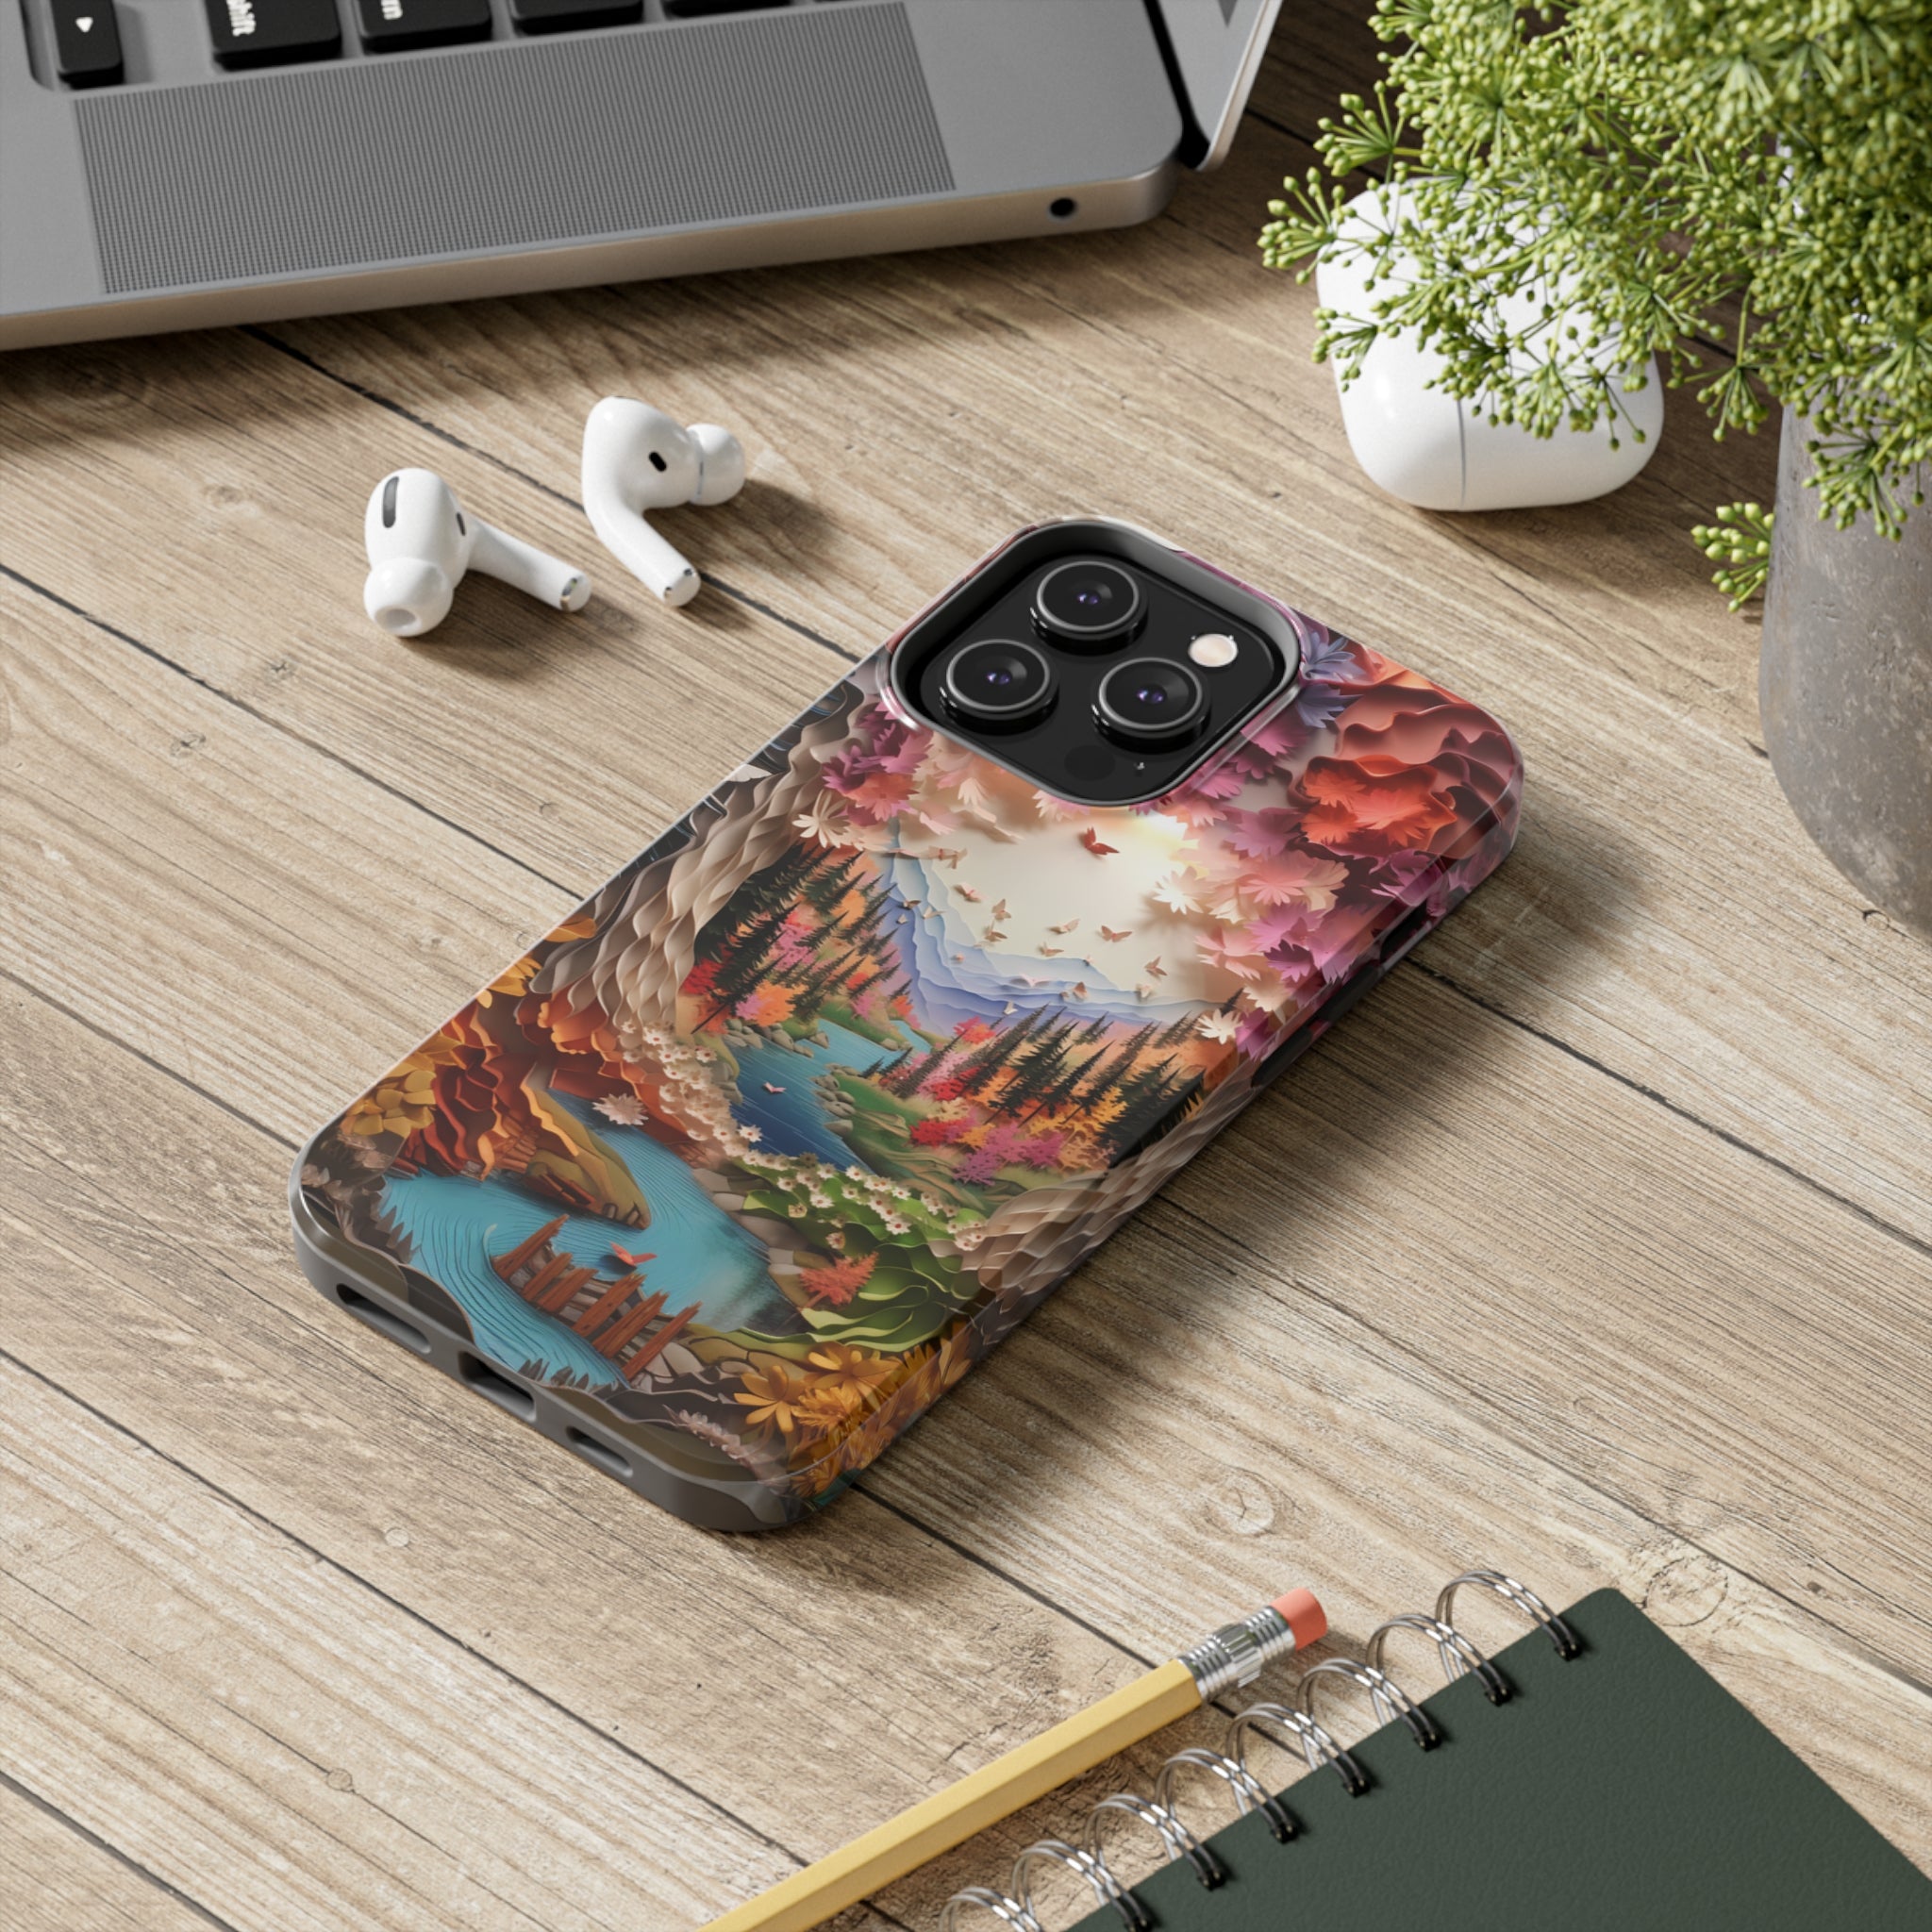 Wilderness Beauty - Tough Phone Cases